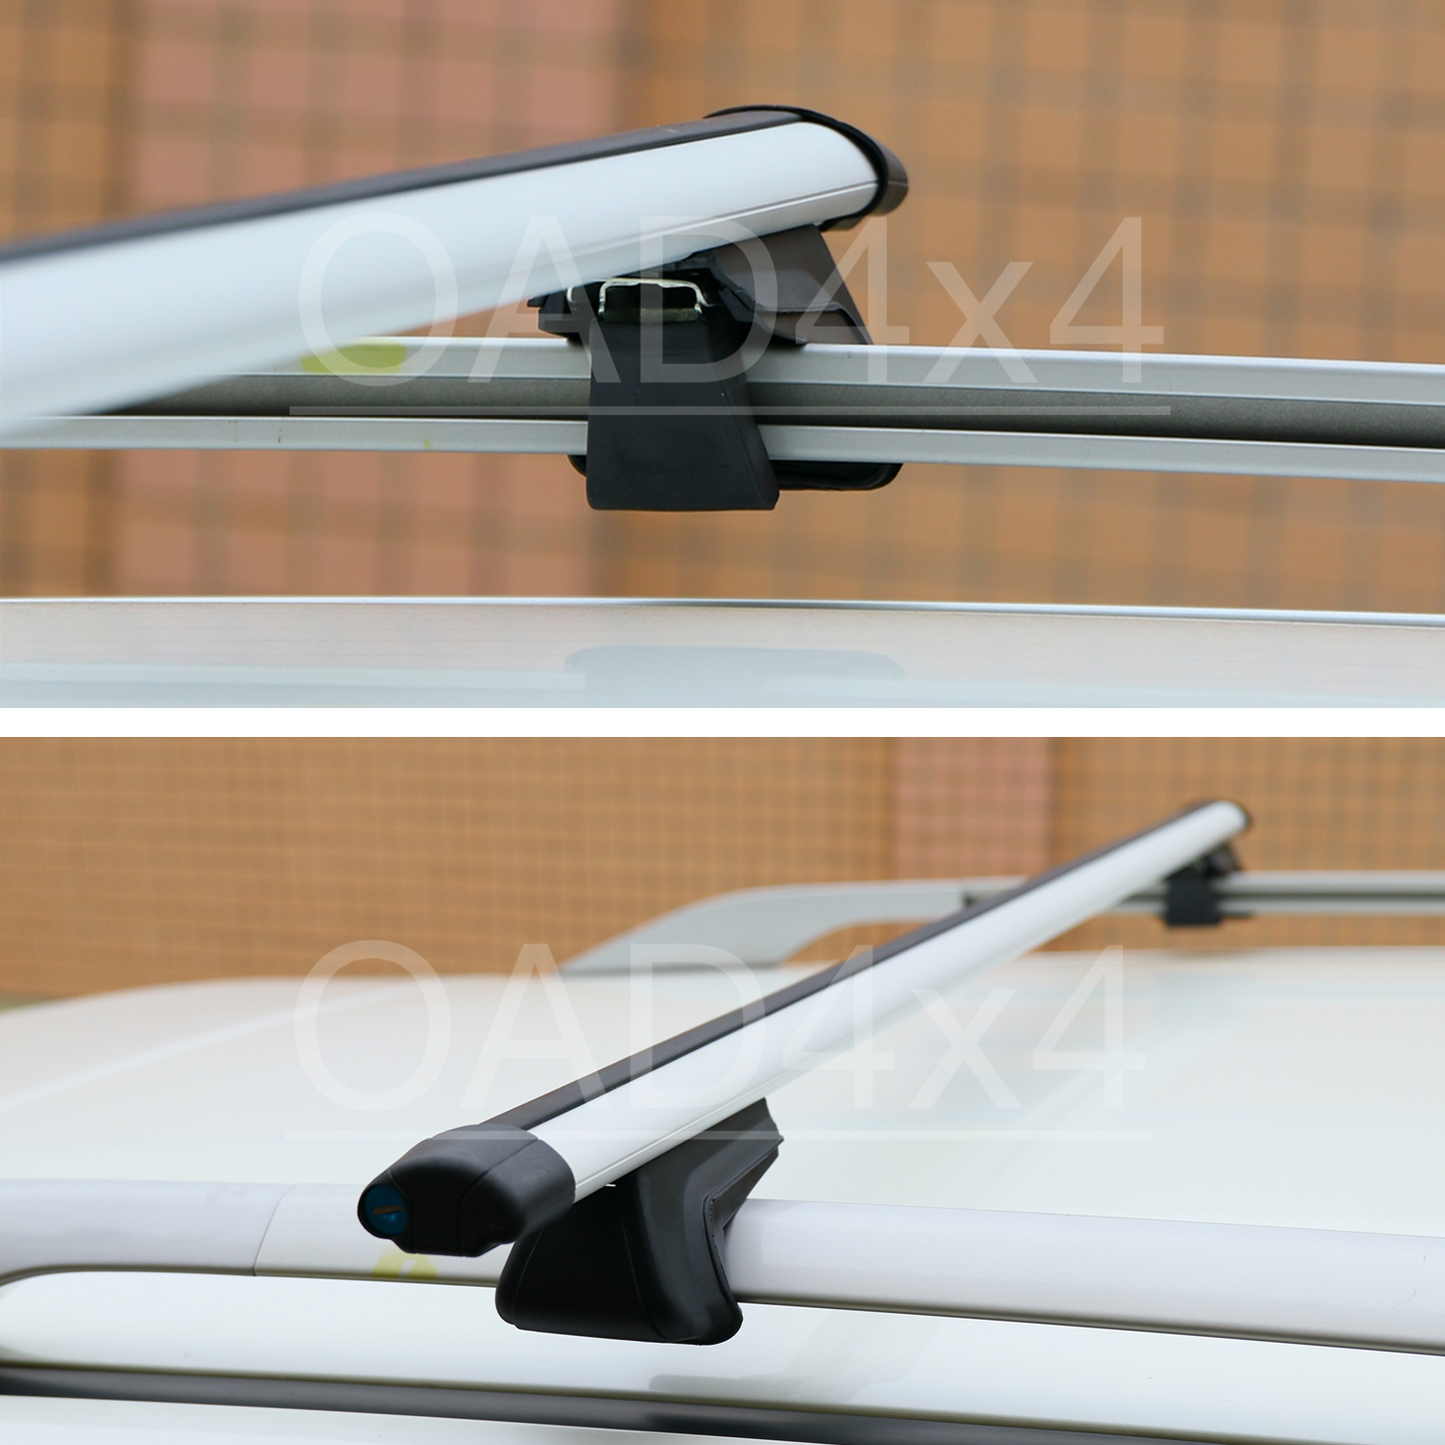 1 Pair Aluminum Silver Cross Bar Roof Racks Baggage holder for Audi A4 wagon with raised roof rail